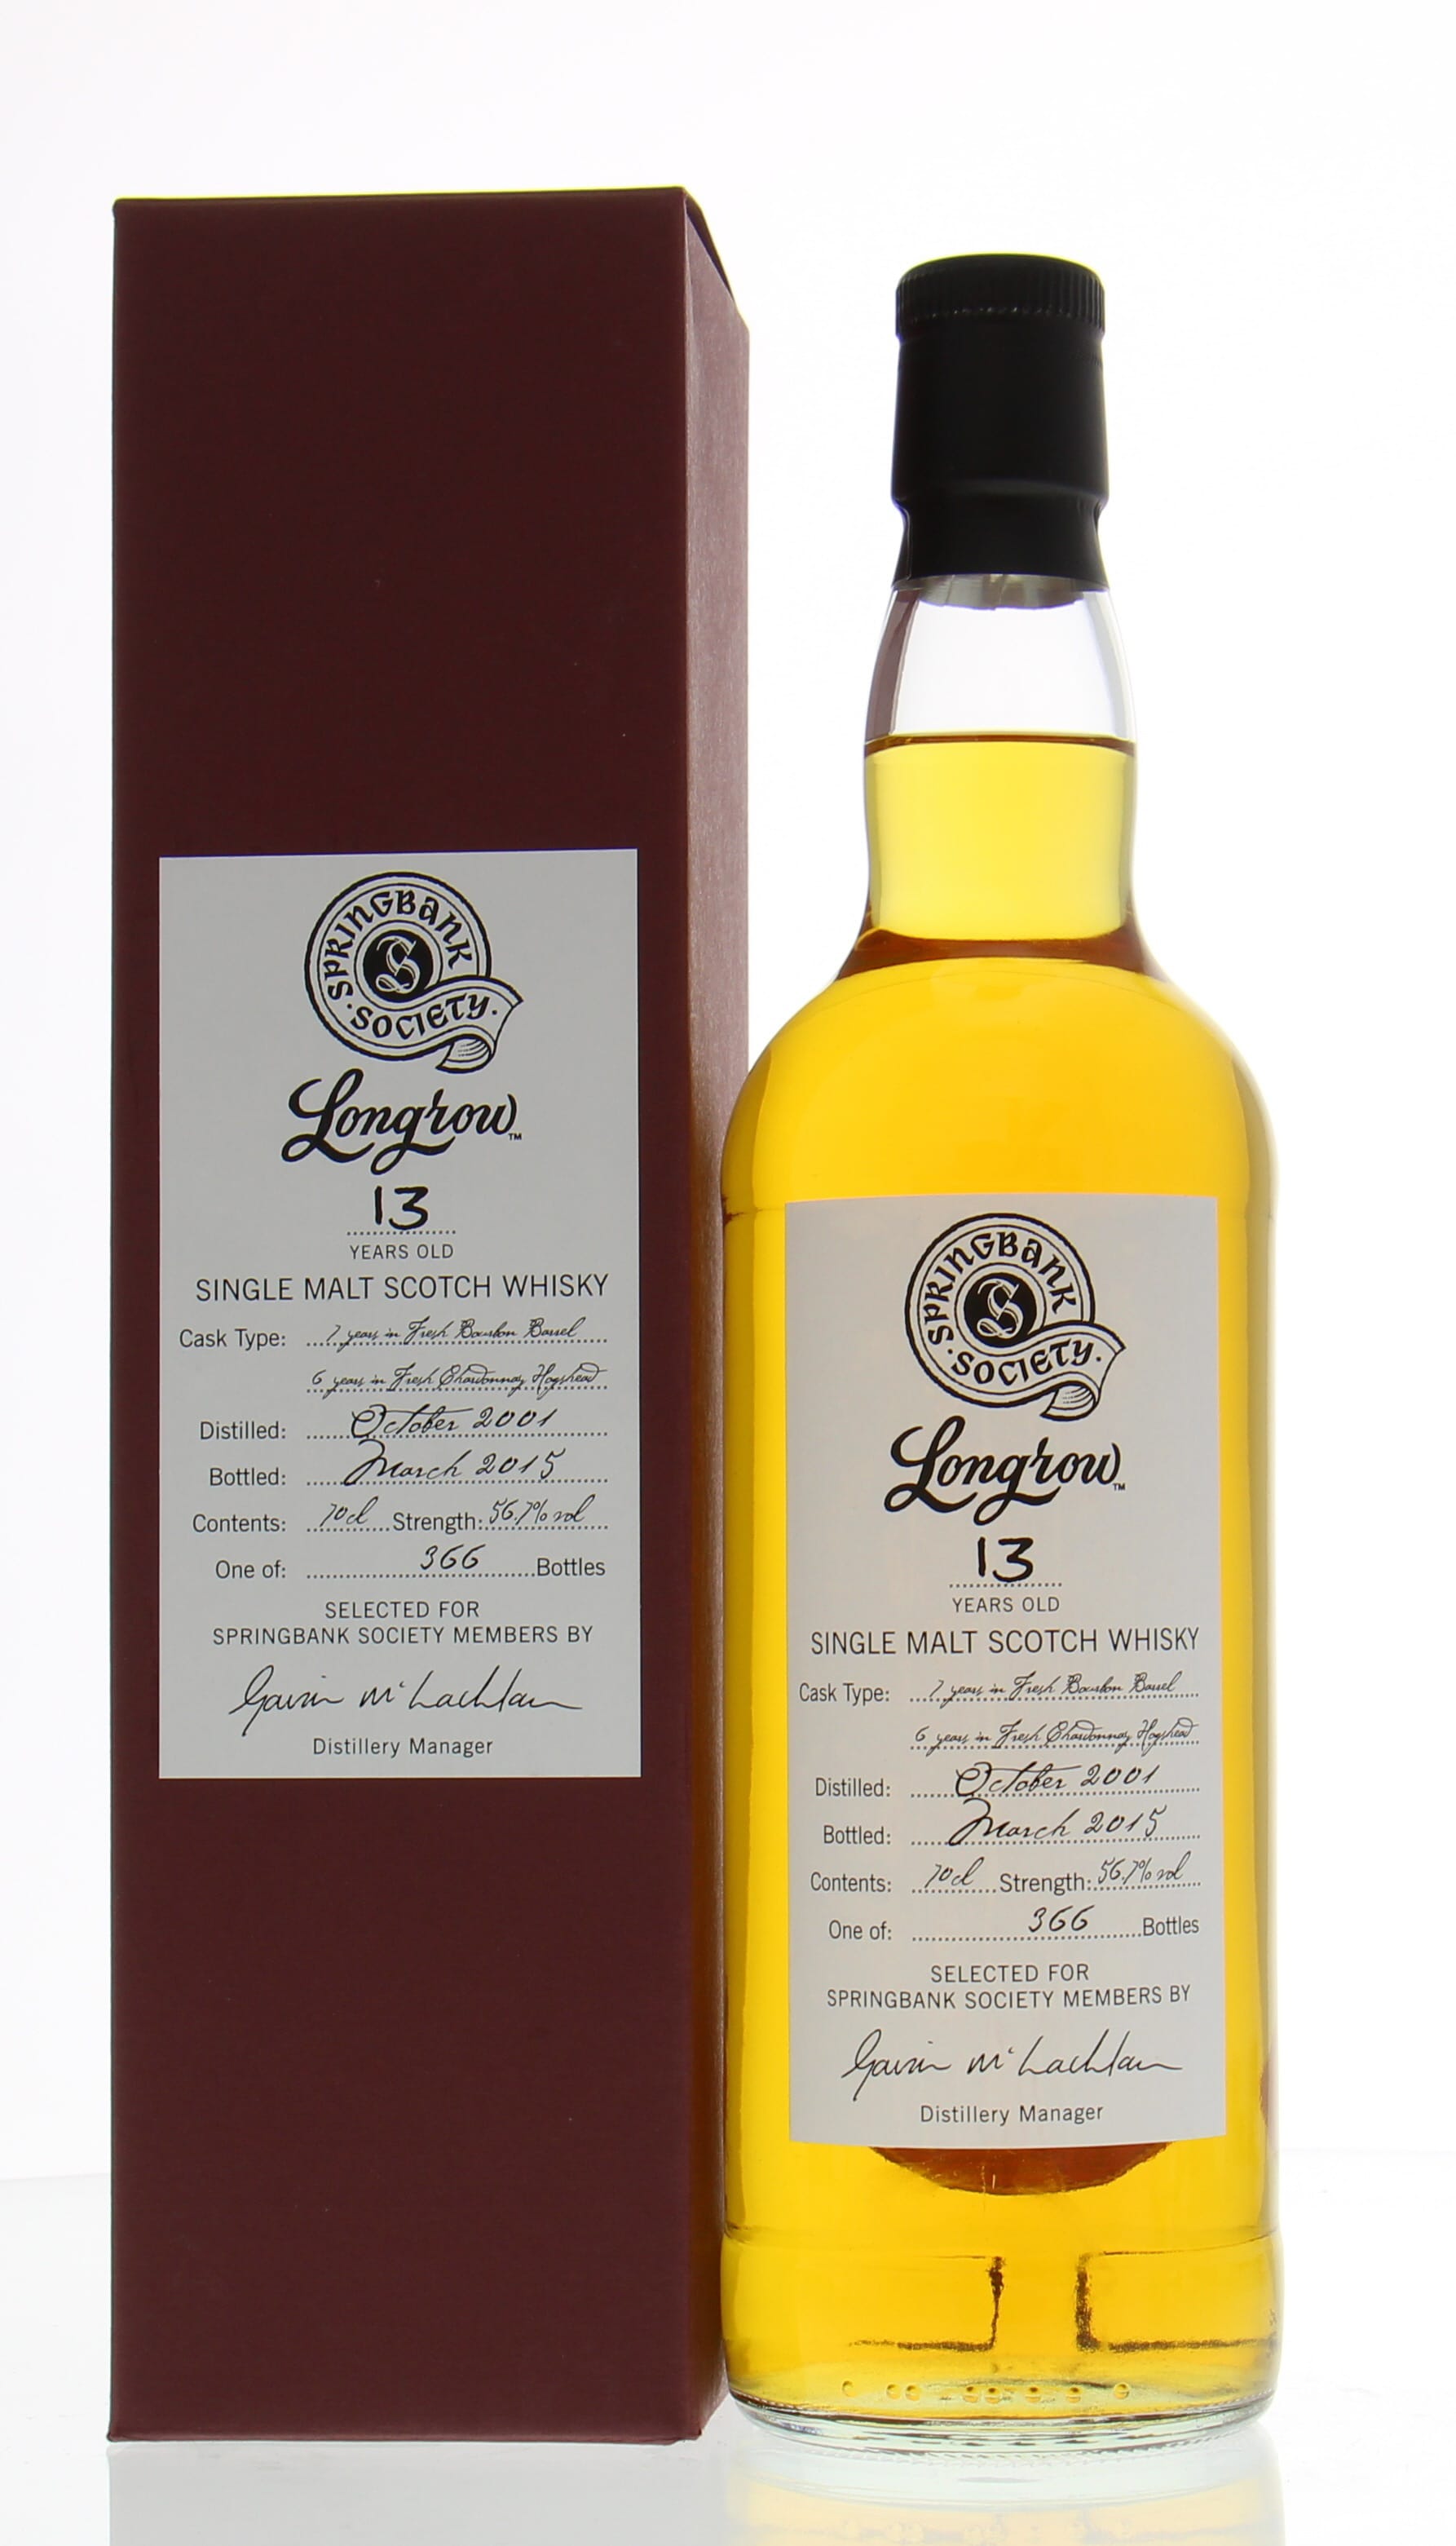 Longrow - 13 Years Old Springbank Society 1 Of 366 Bottles 56.7% 2001 In Original Container